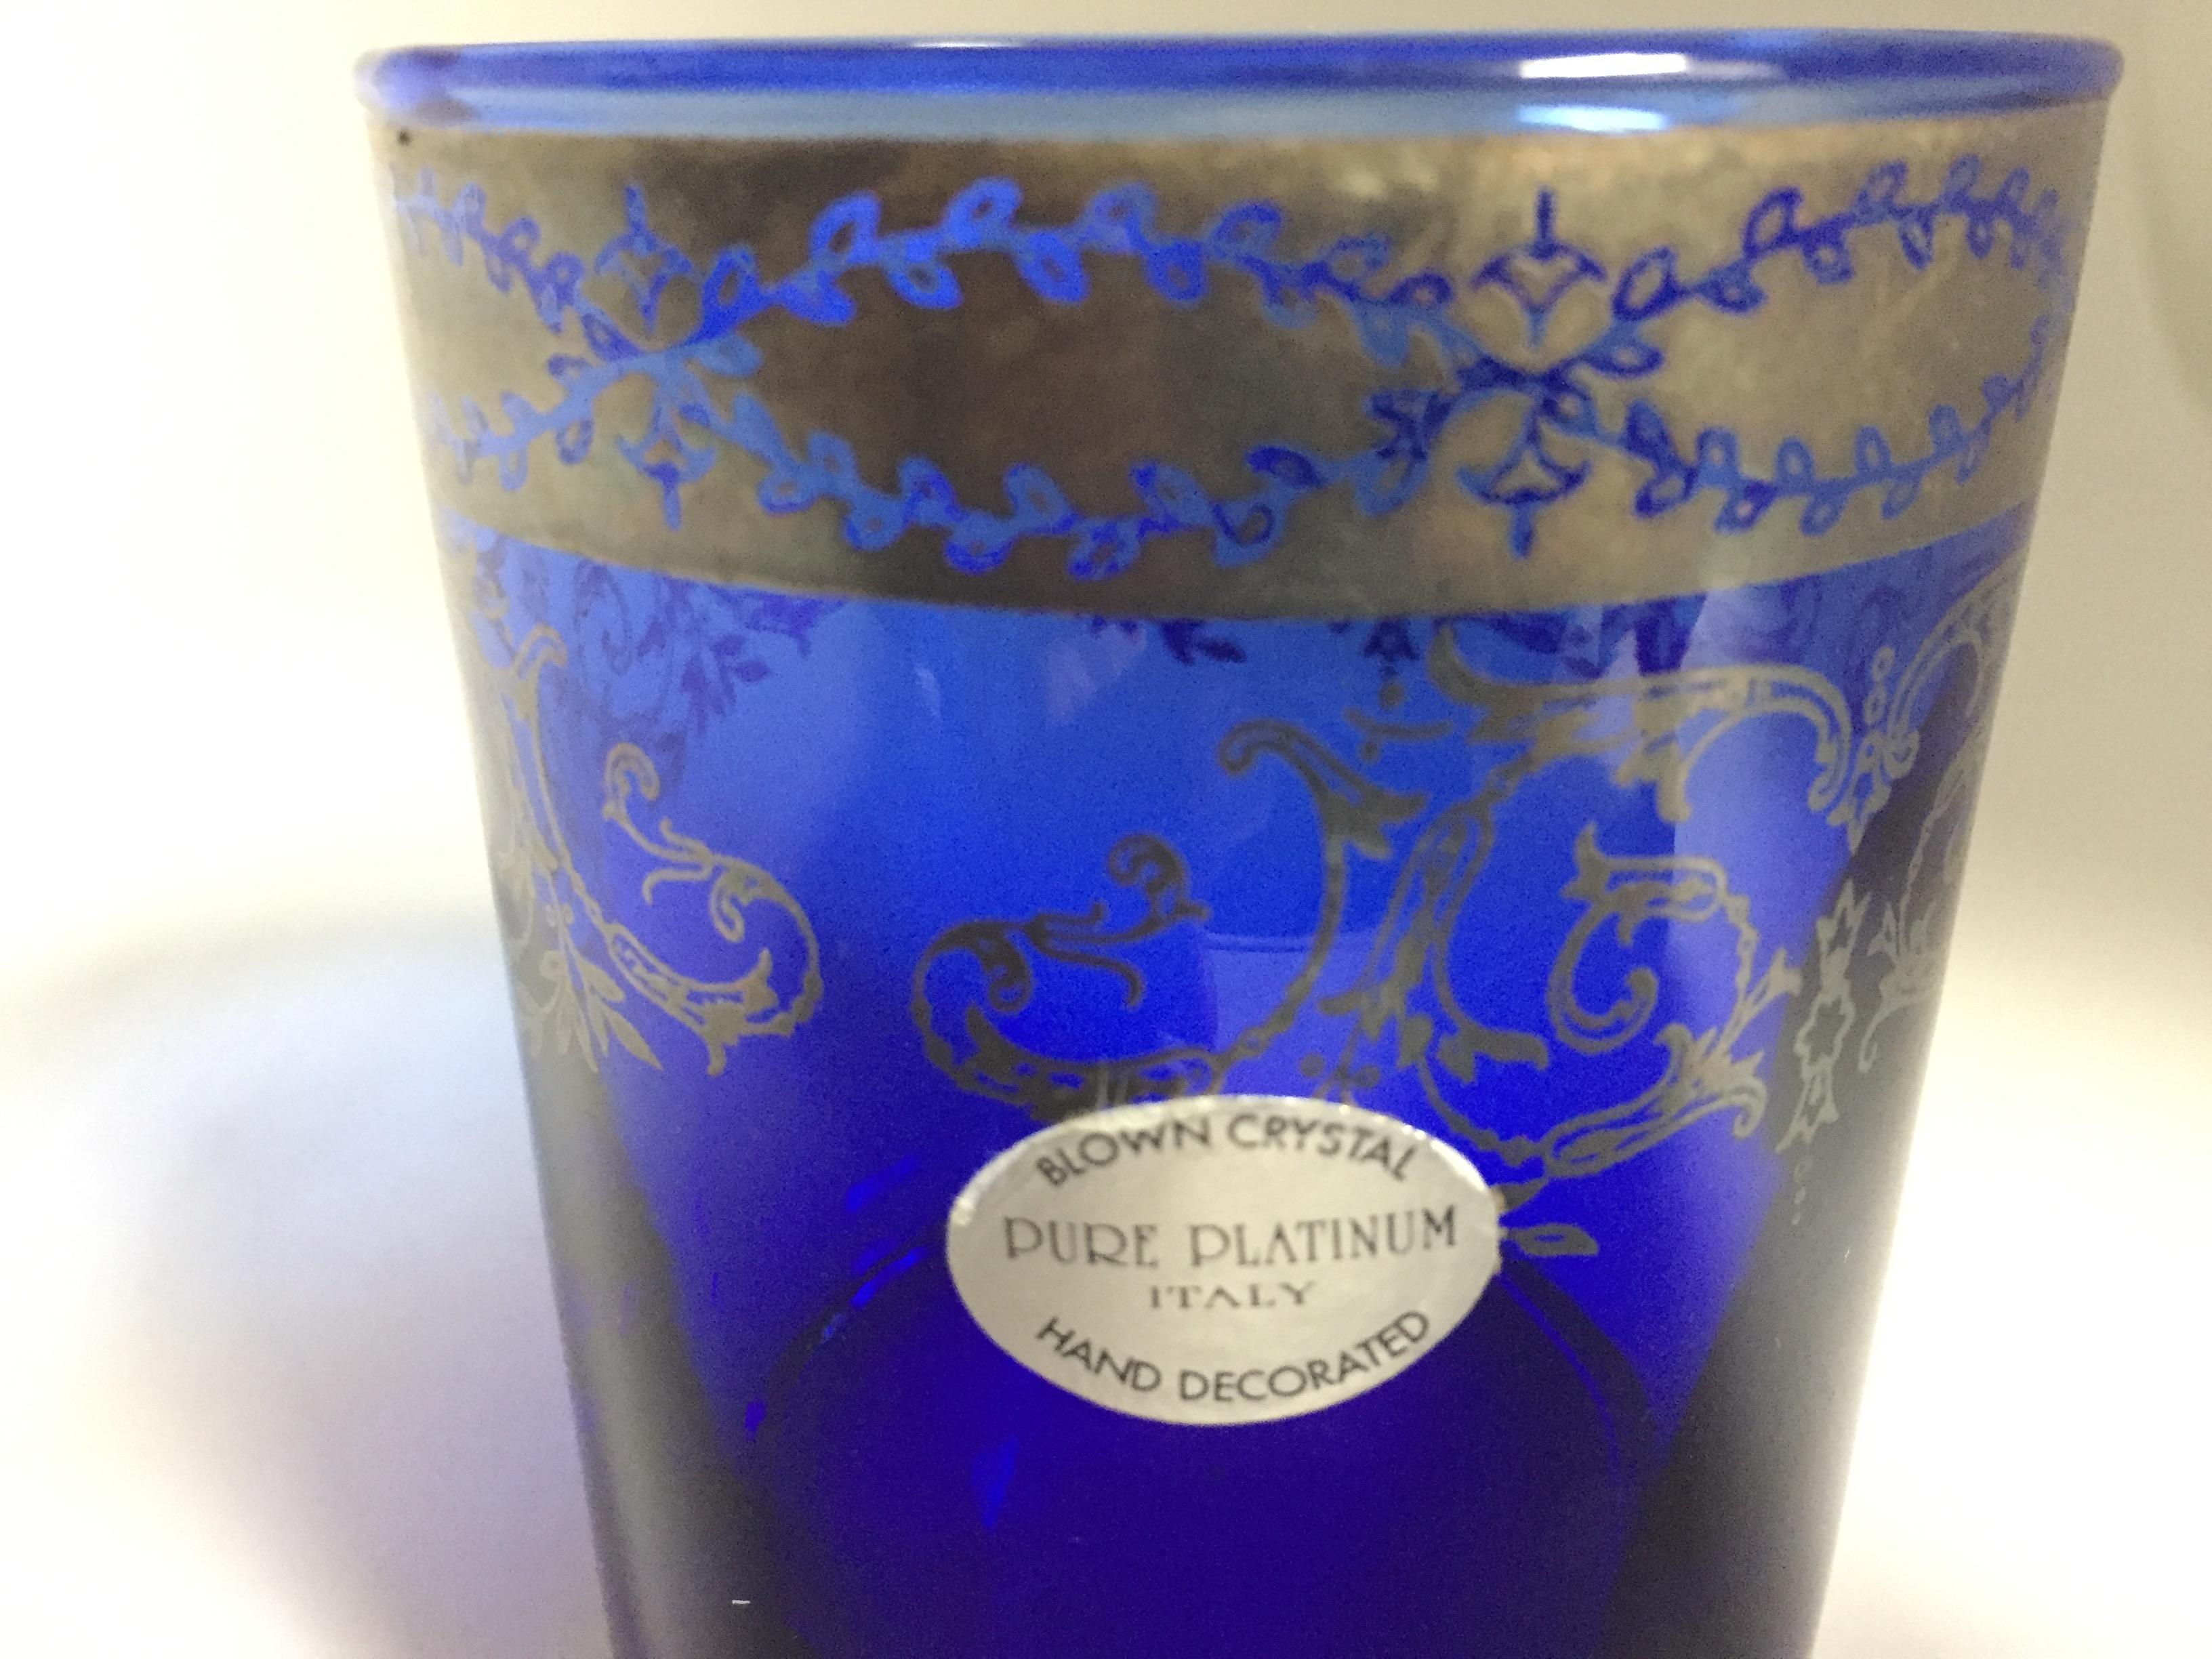 Blown Crystal Whiskey Glasses Tumbler Gilt Baccarat in Sapphire Blue, Italy 2